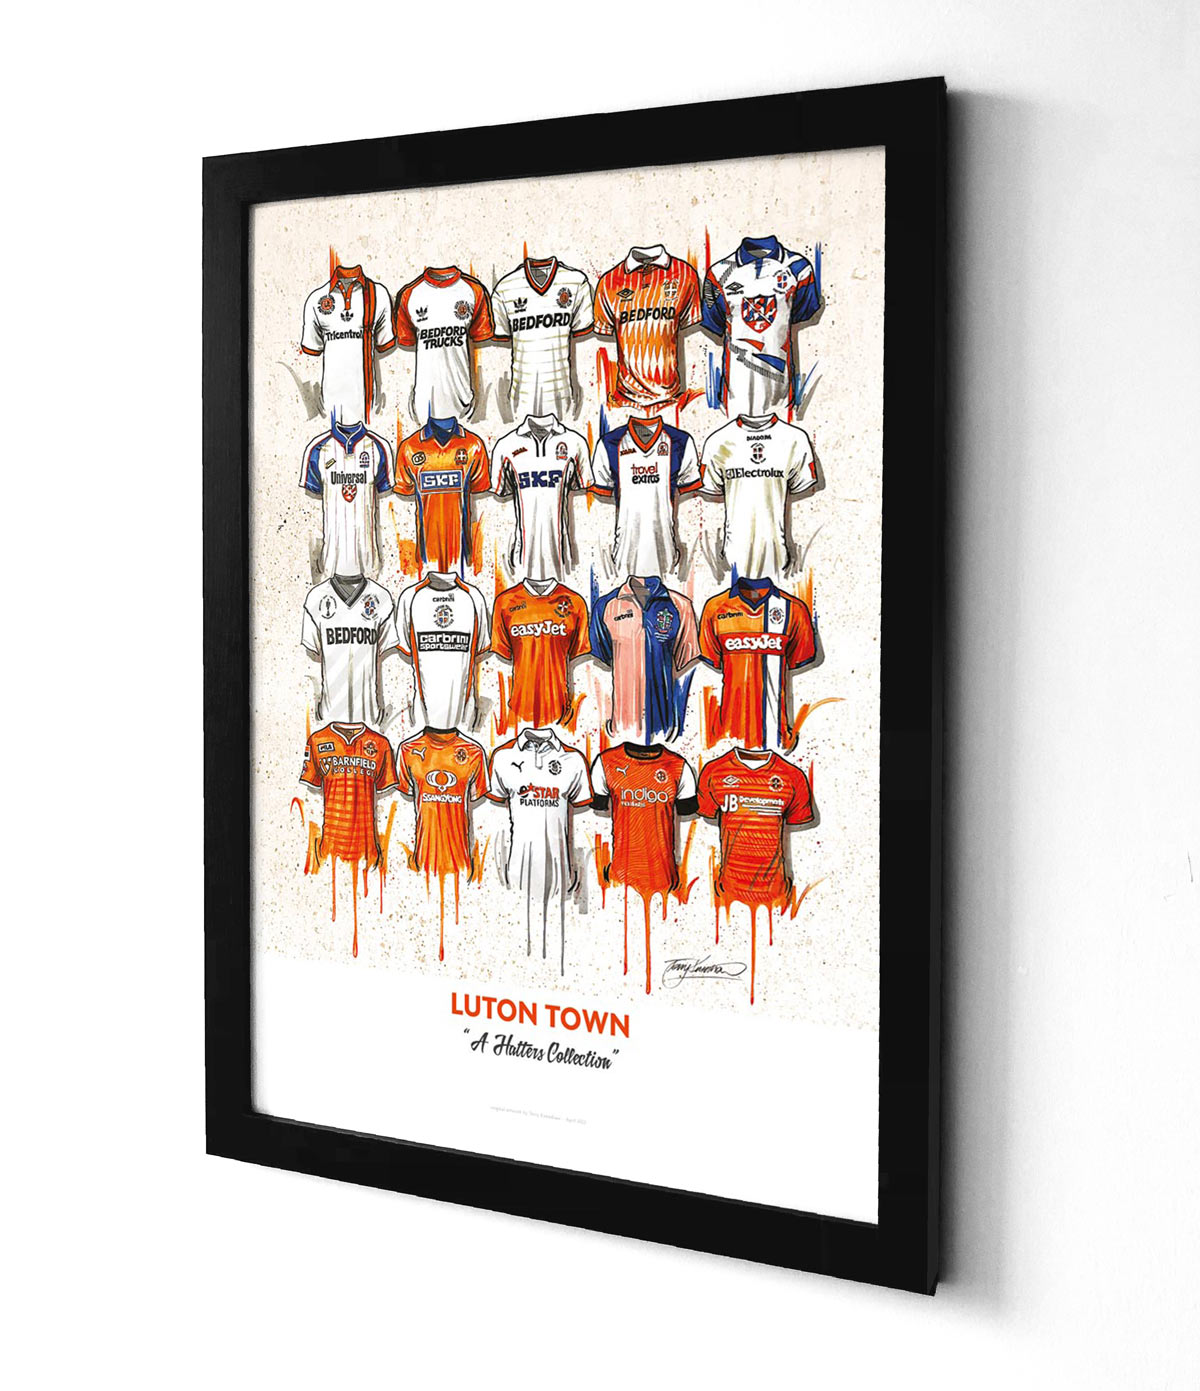 The Luton Personalised A2 limited edition print artwork by Terry Kneeshaw features 20 iconic jerseys of Luton team shirts. The artwork is designed to show the evolution of Luton's football club shirts over the years. It is an excellent addition to any Luton fan's collection. The artwork is perfect for displaying at home, office or even in a sports bar. It showcases the team's proud history and legacy through the iconic jerseys.